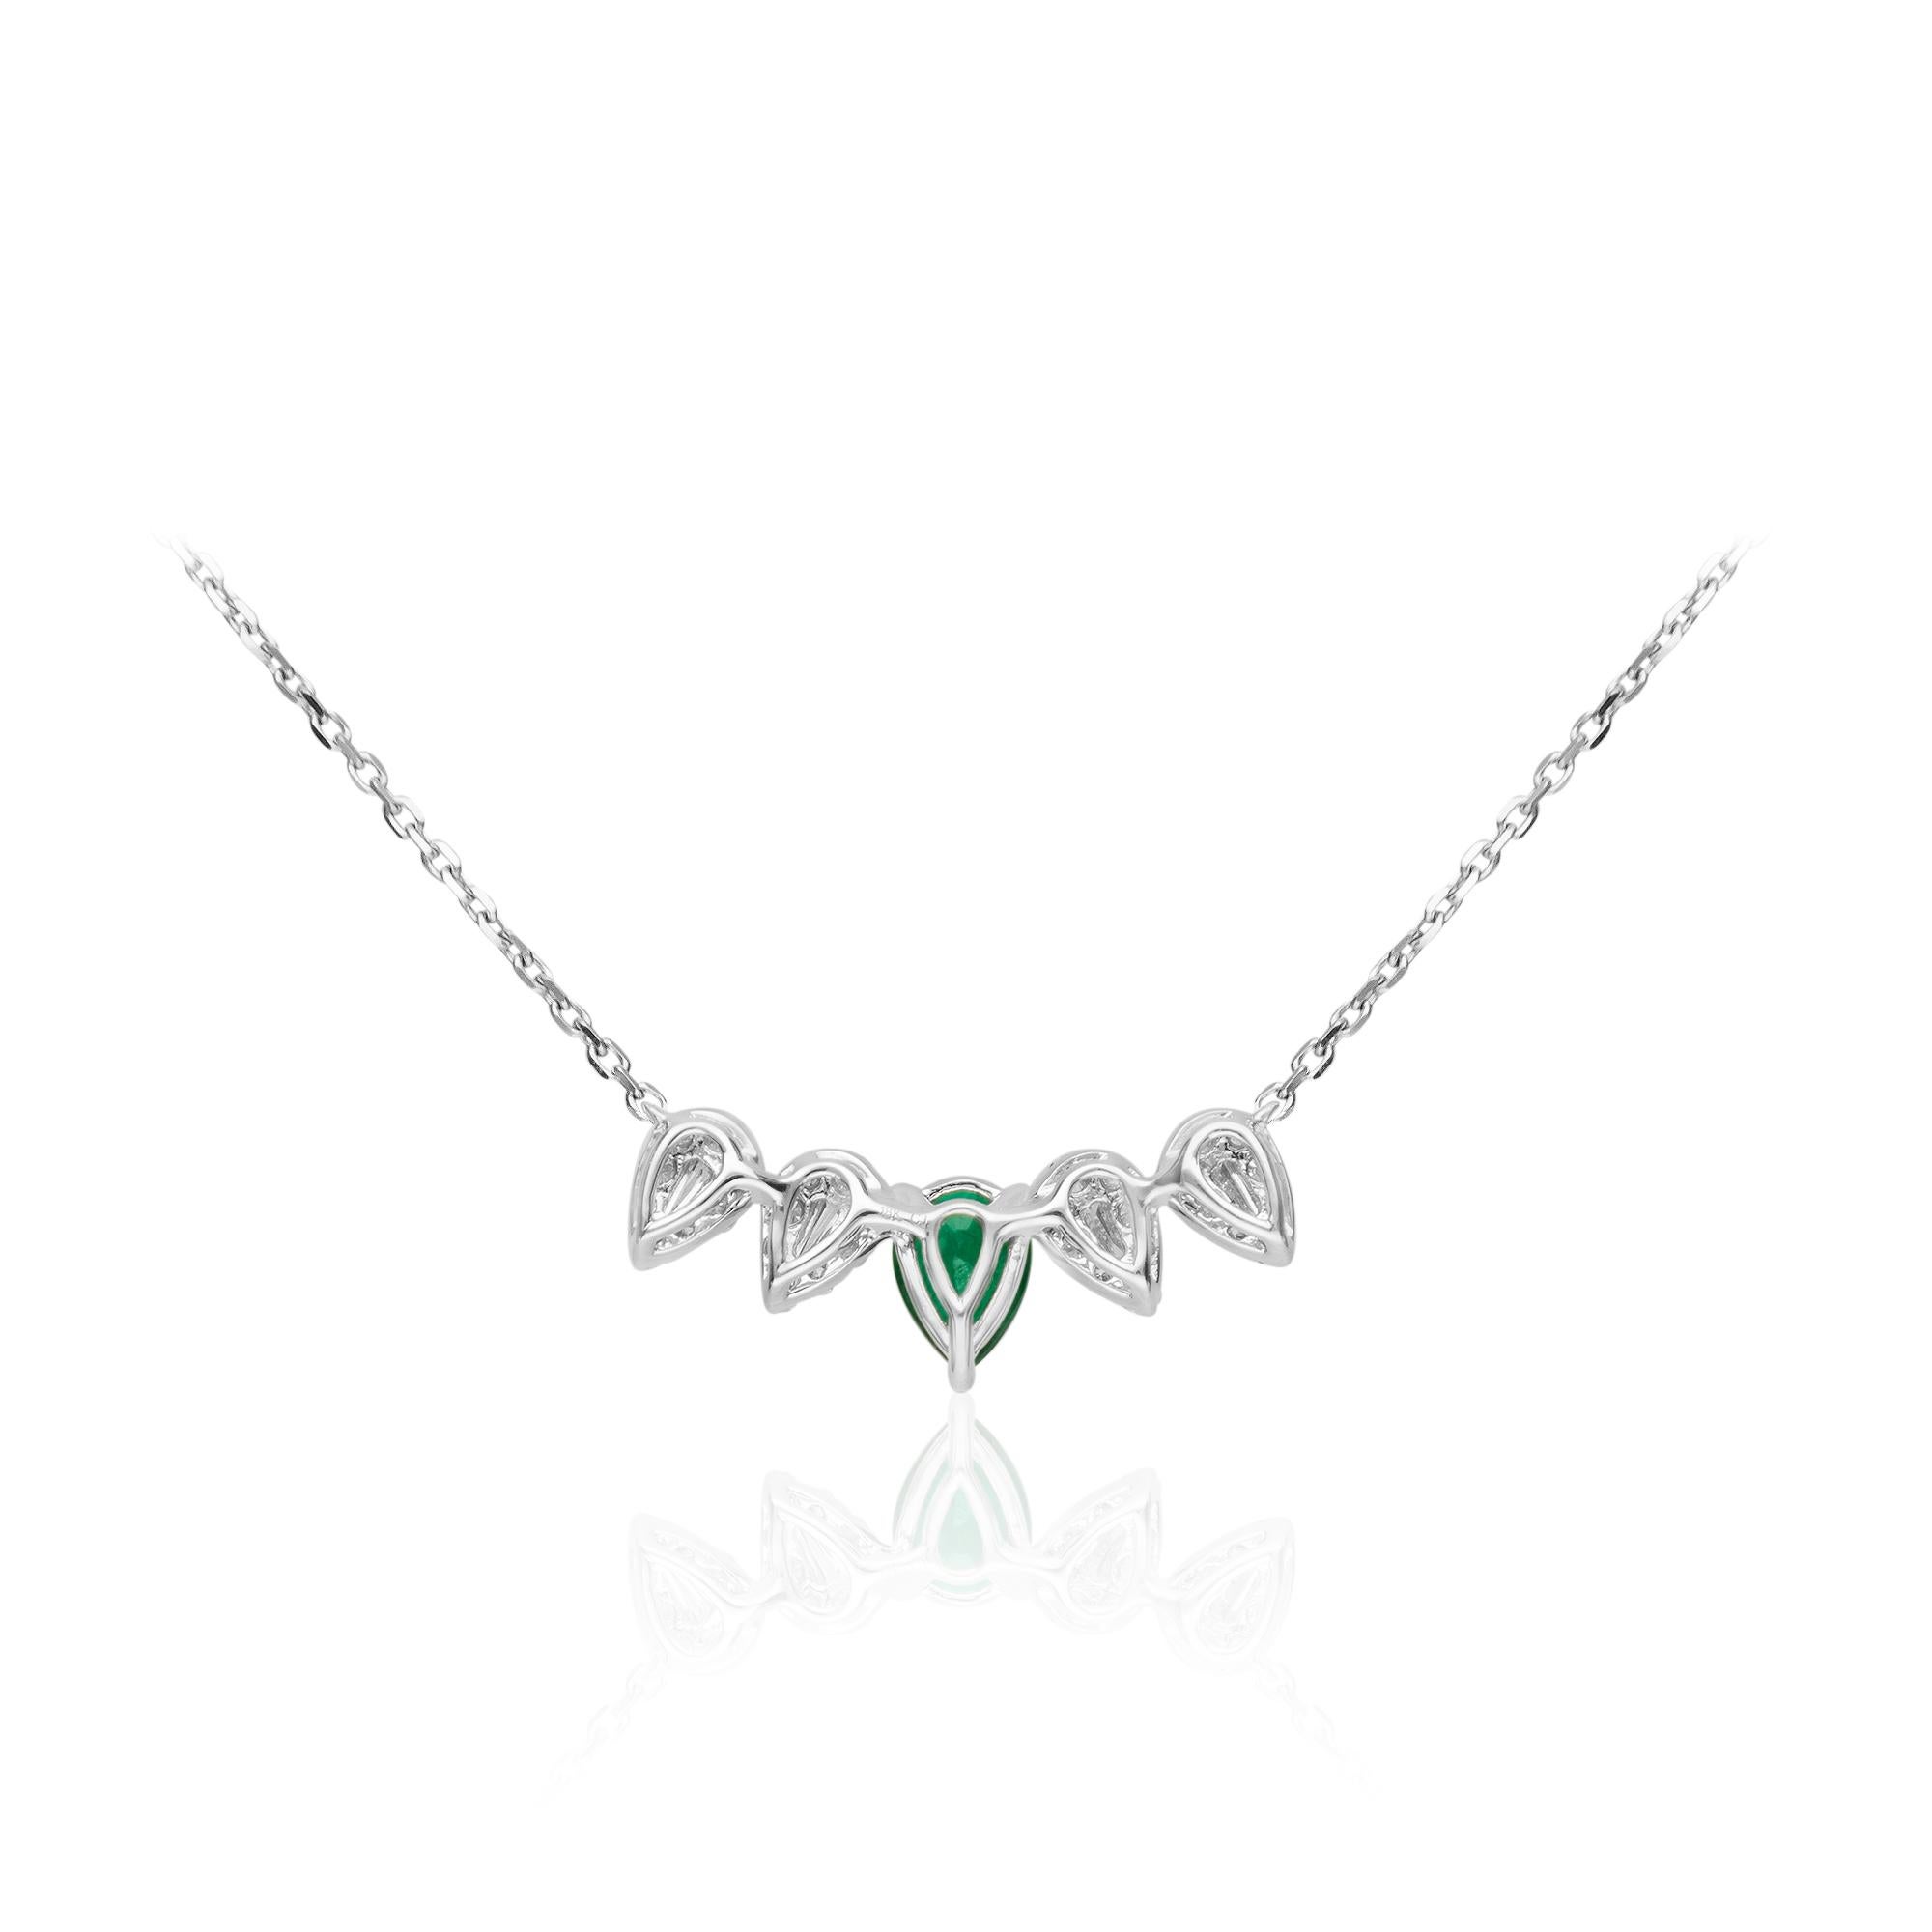 This one of a kind Necklace is crafted in 18-karat White Gold and features a 1 Emerald 3/5 Carat, 4 Baguette Diamond 1/11 Carat & 32 Round Diamond 1/3 Carat and this Necklace is a perfect gift either for yourself or someone you love.